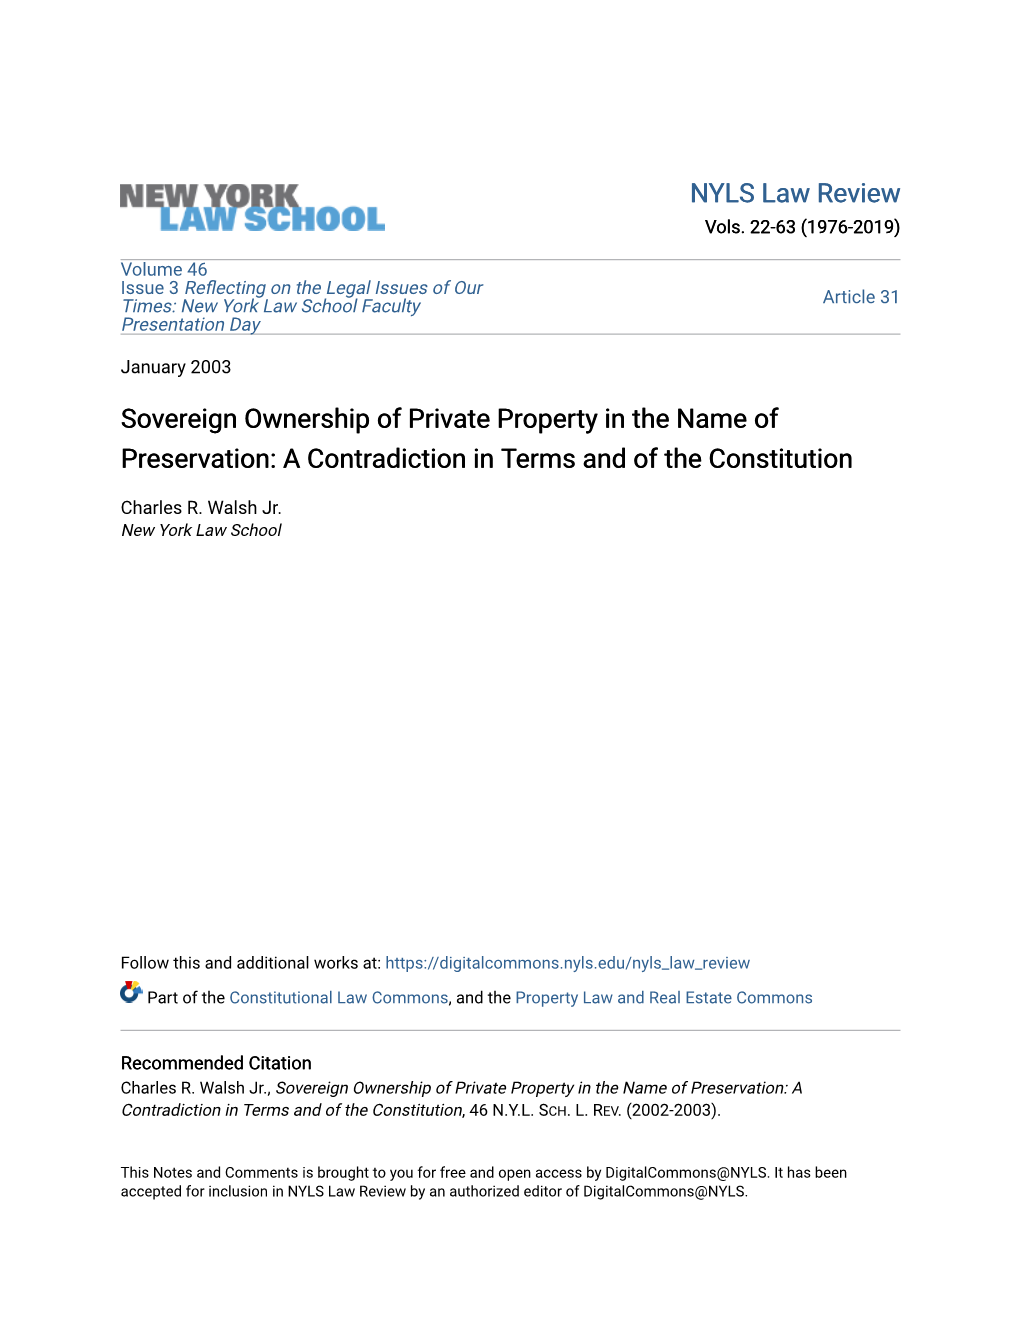 Sovereign Ownership of Private Property in the Name of Preservation: a Contradiction in Terms and of the Constitution